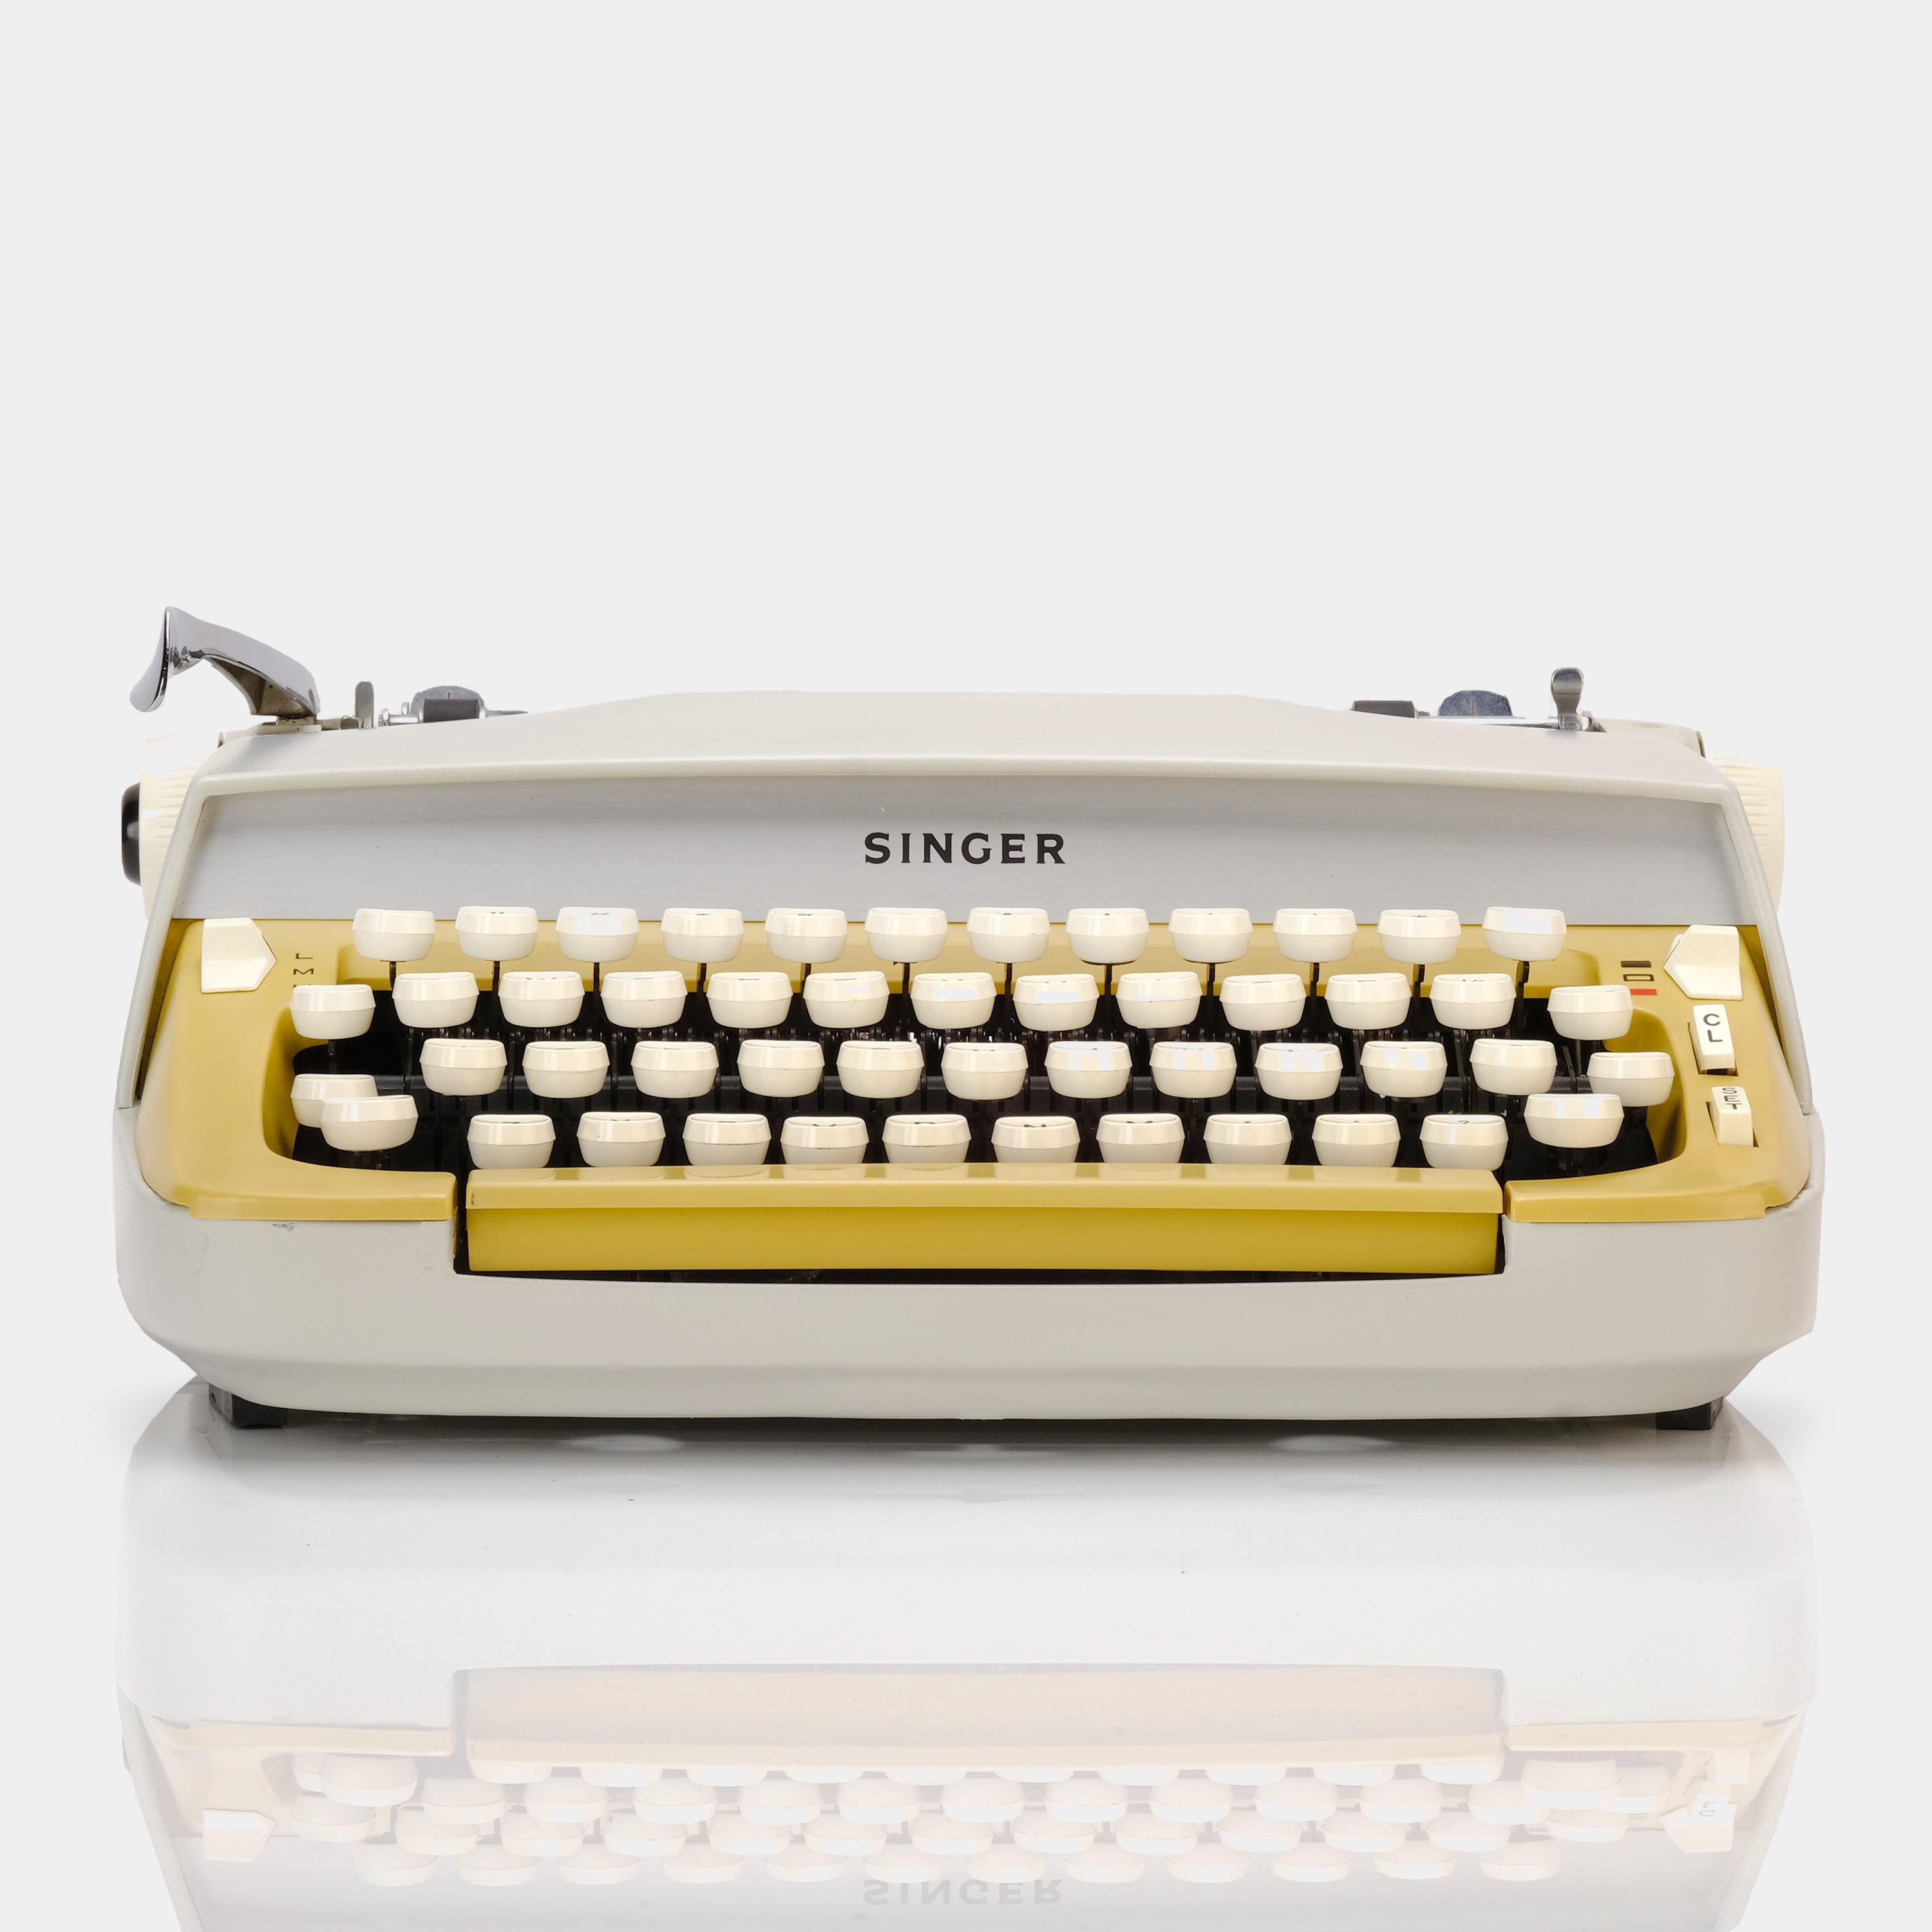 Singer Scholastic Beige Manual Typewriter and Case